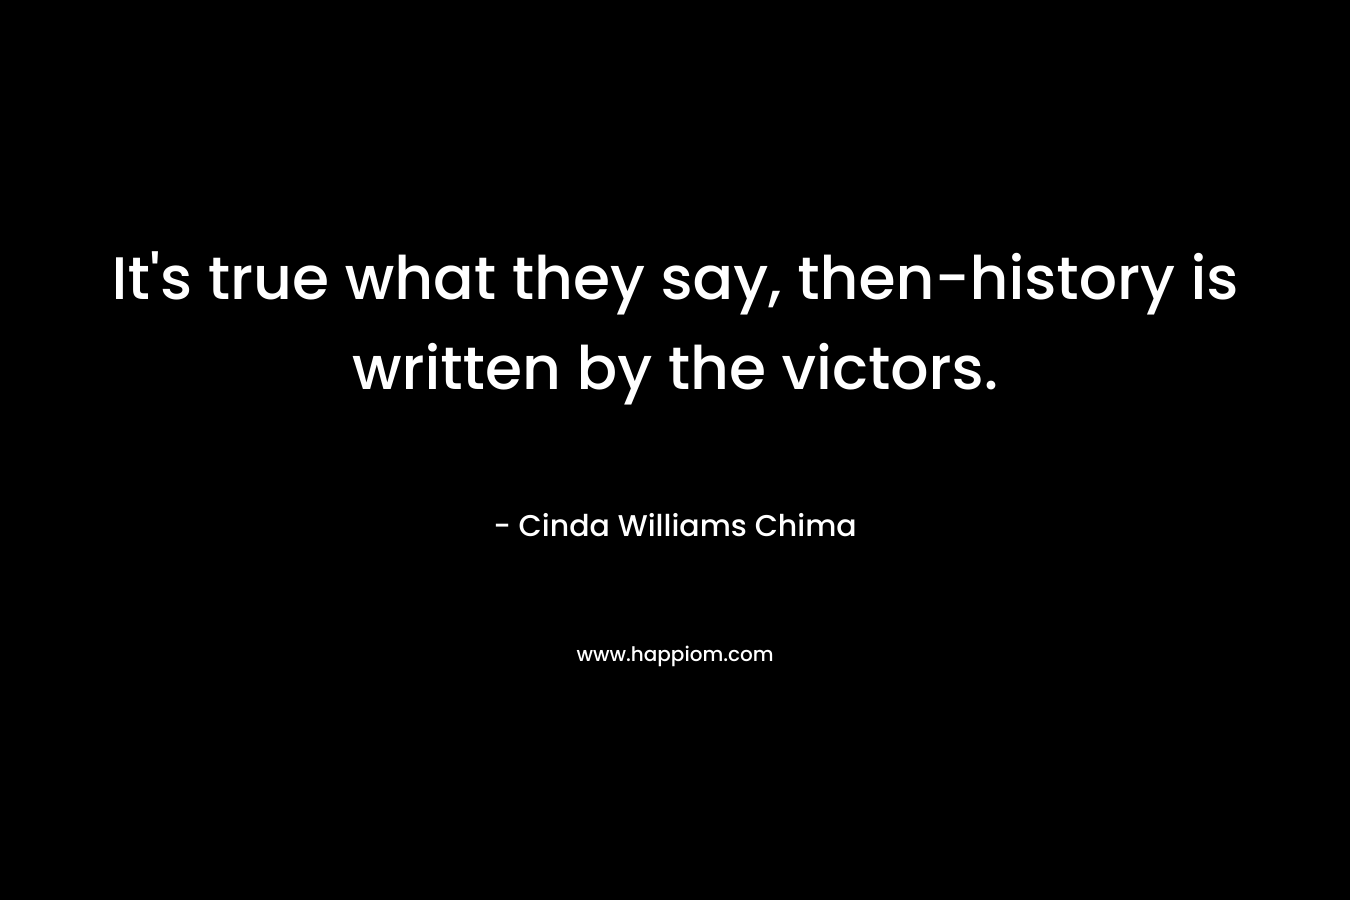 It’s true what they say, then-history is written by the victors. – Cinda Williams Chima